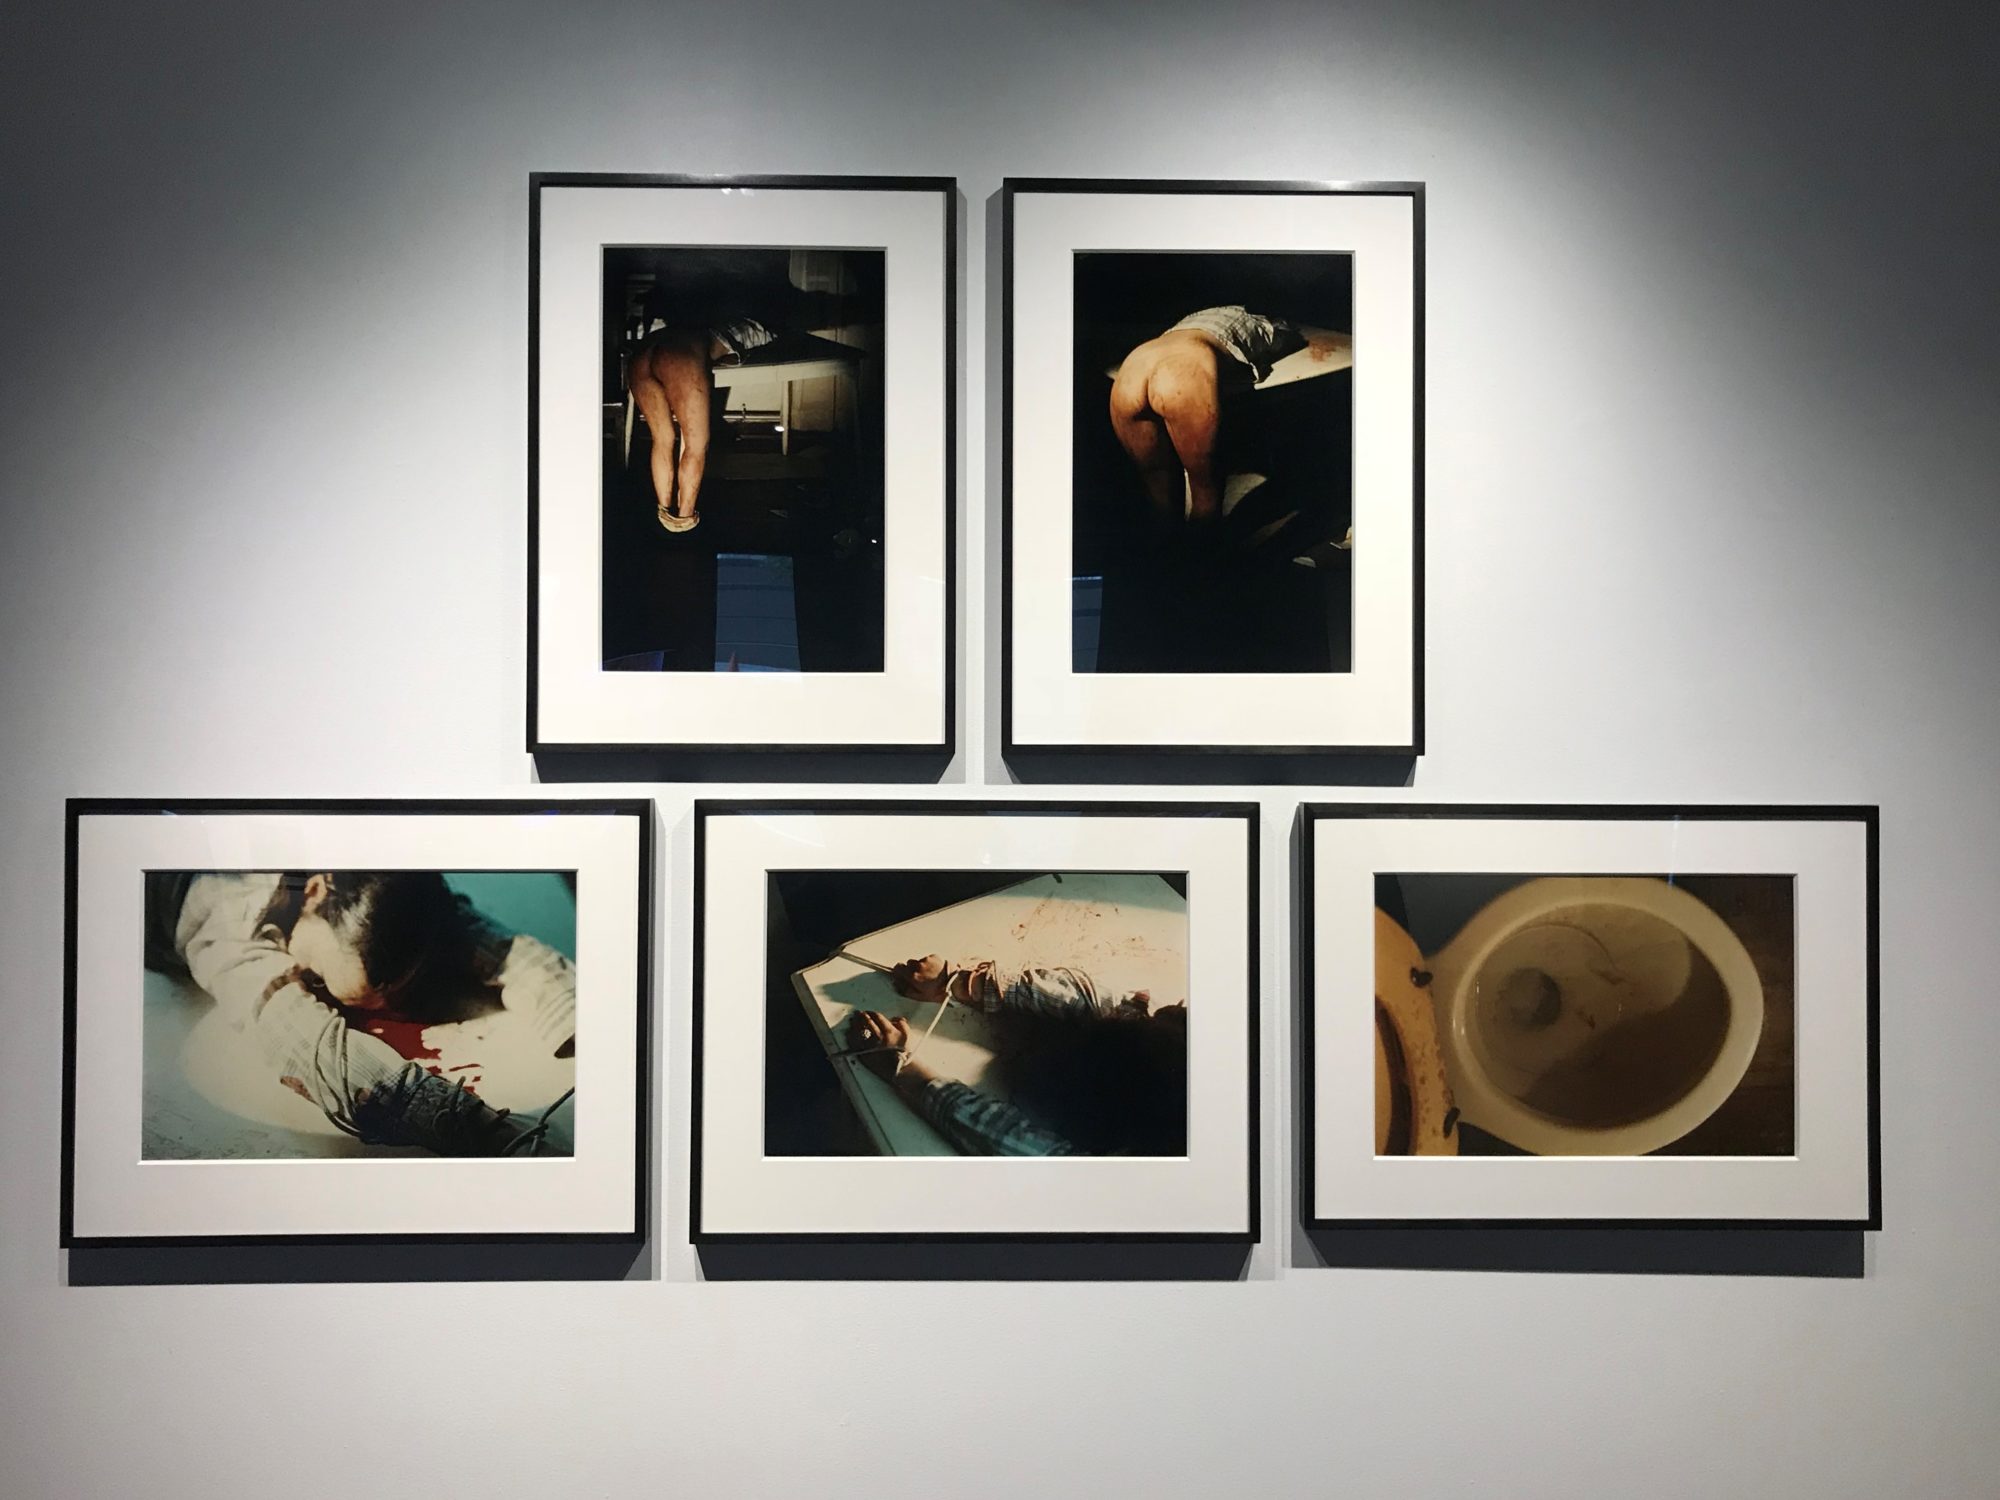 *Content Warning* Five photographs are hung on a white wall: four depict a woman, smeared in blood and naked from the waste down, tied to a wall; one depicts the inside of a toilet bowl.